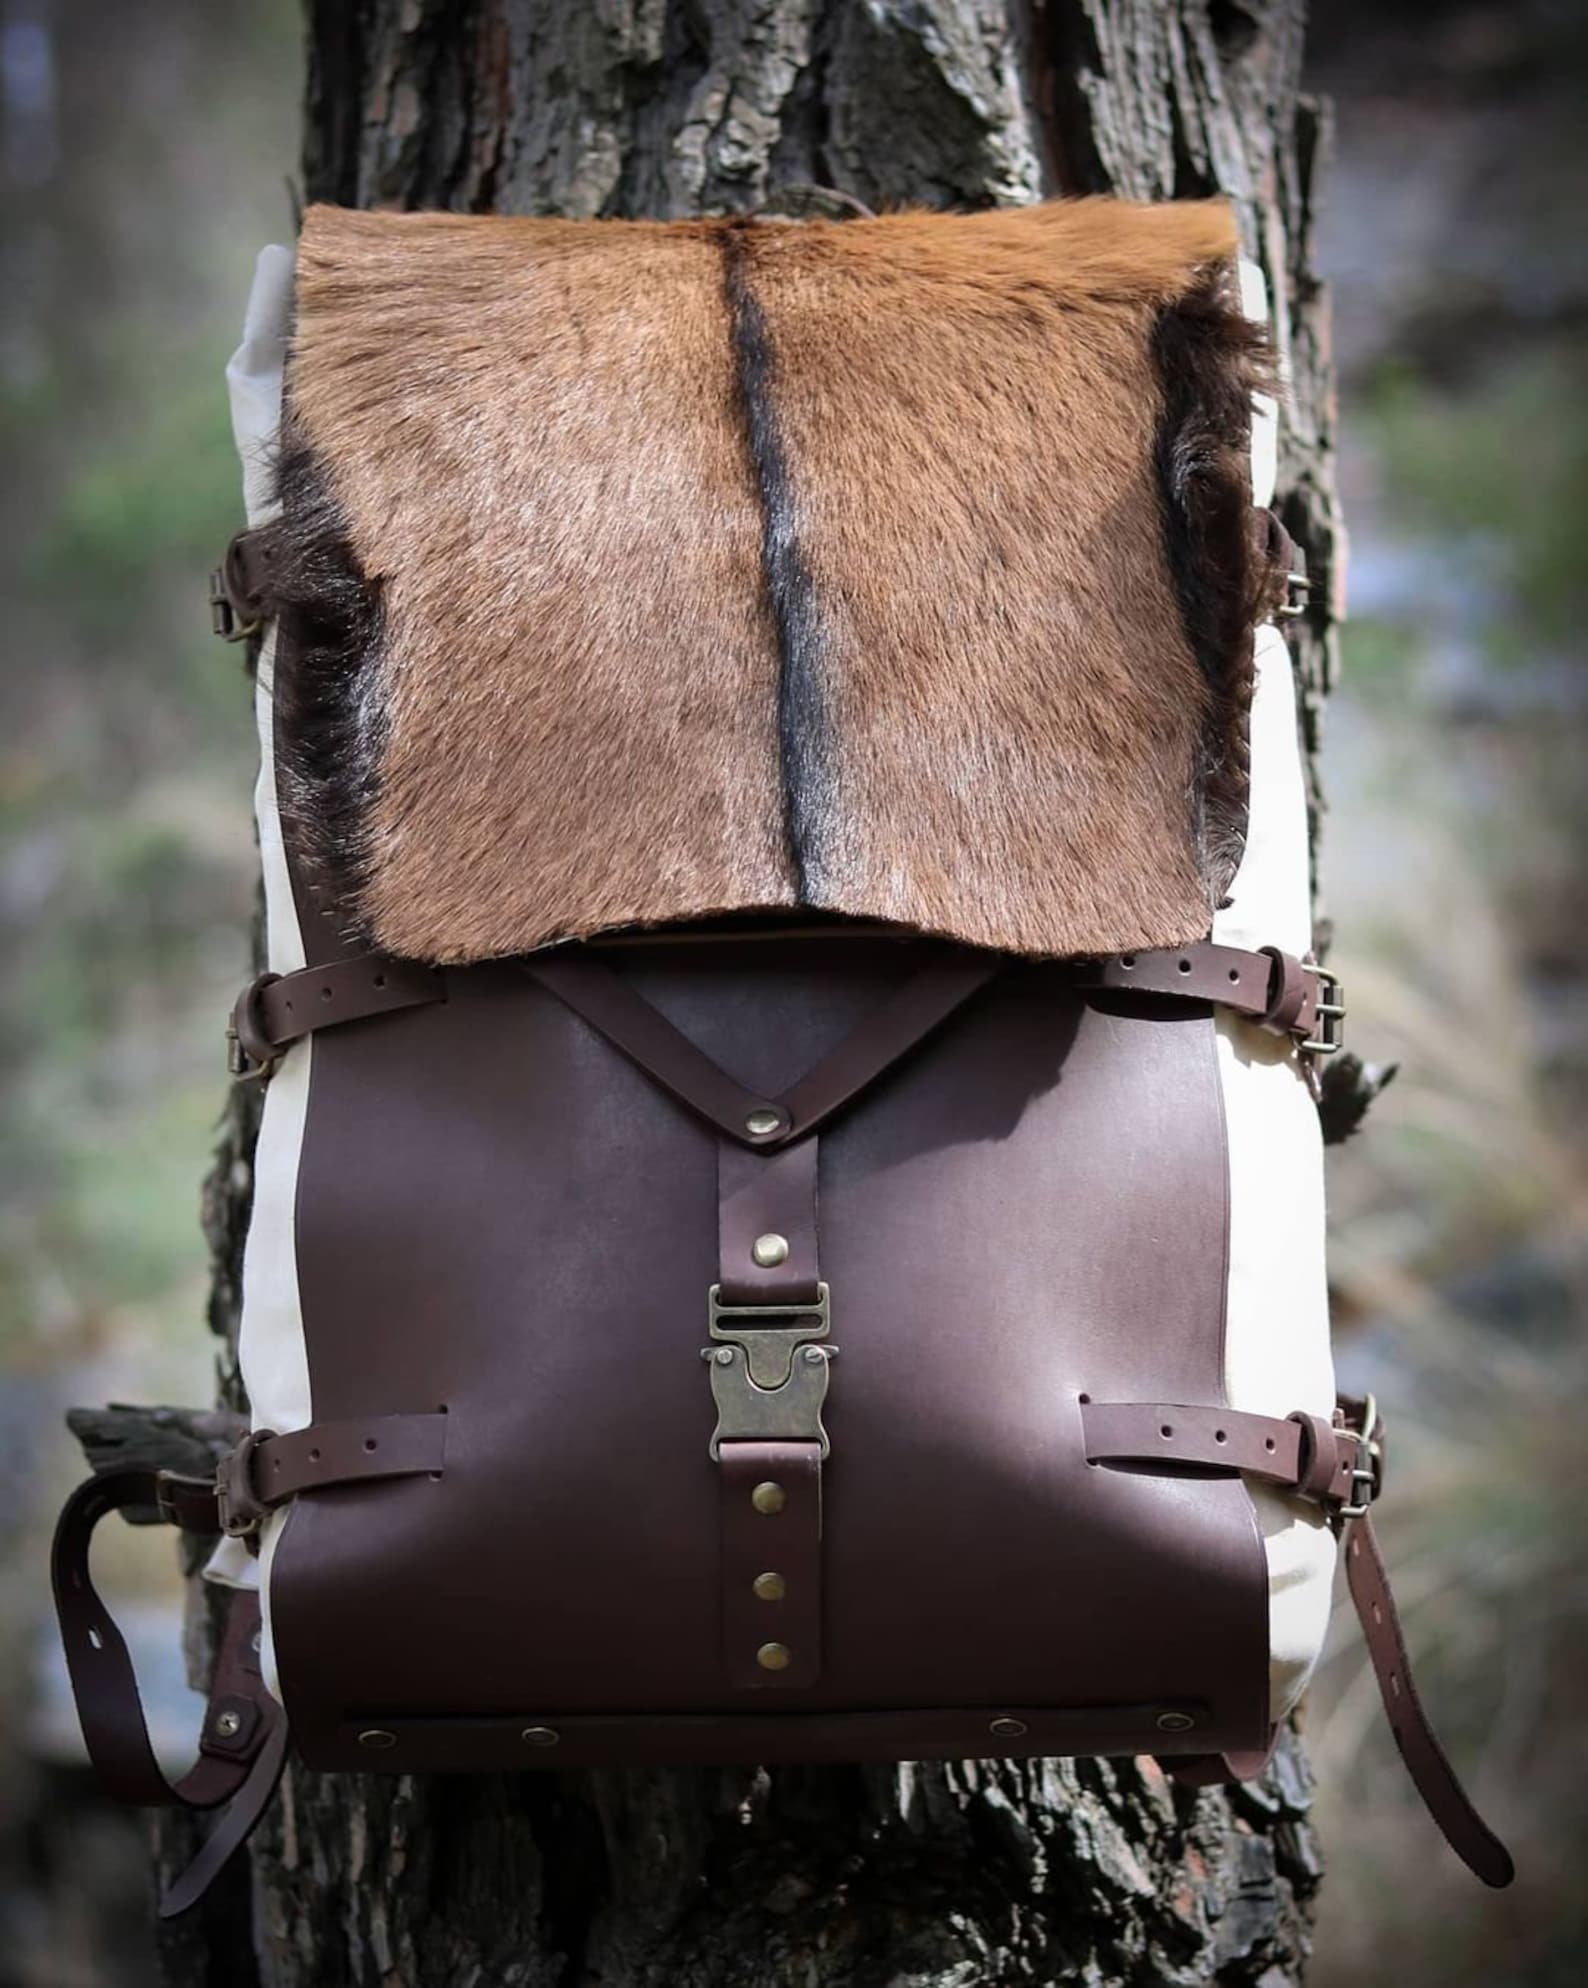 Goat Fur , Canvas and Leather Bag | Bushcraft | Camping | Outdoor | Hiking | Handmade Backpack l  | 30,40,50 Litres option bushcraft - camping - hiking backpack 99percenthandmade   